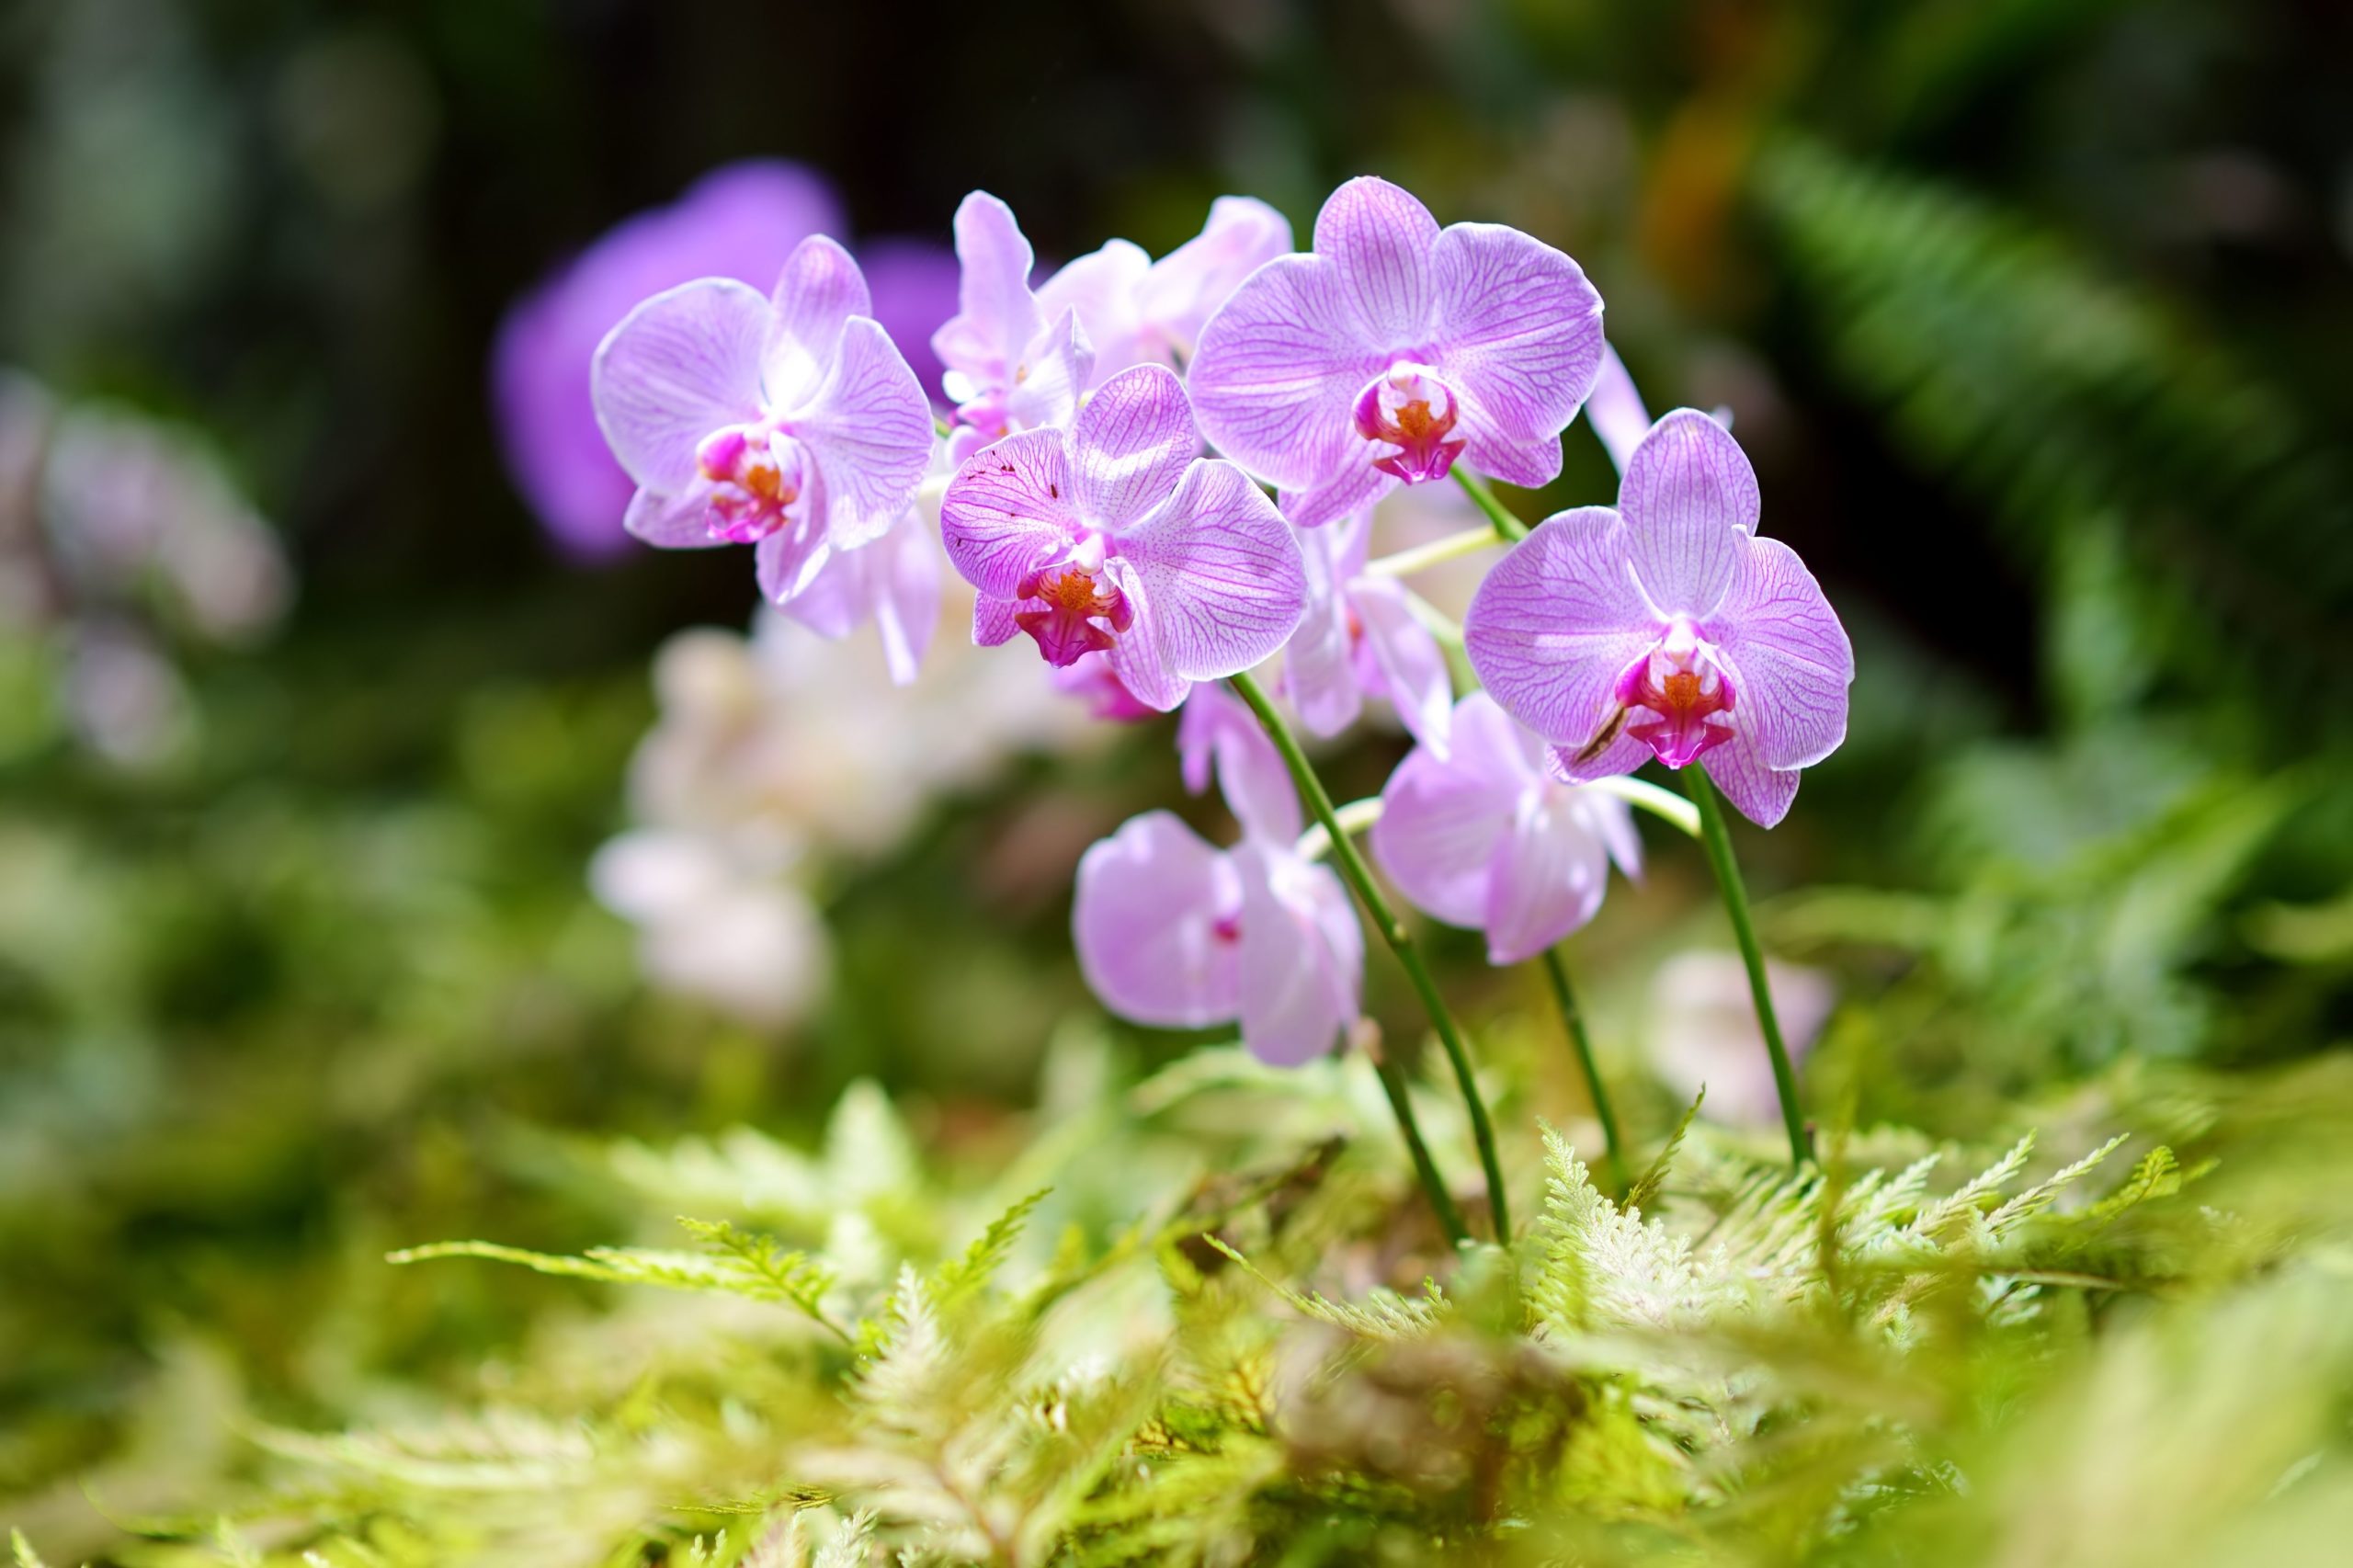 Orchids are a beloved Hawaiian flower